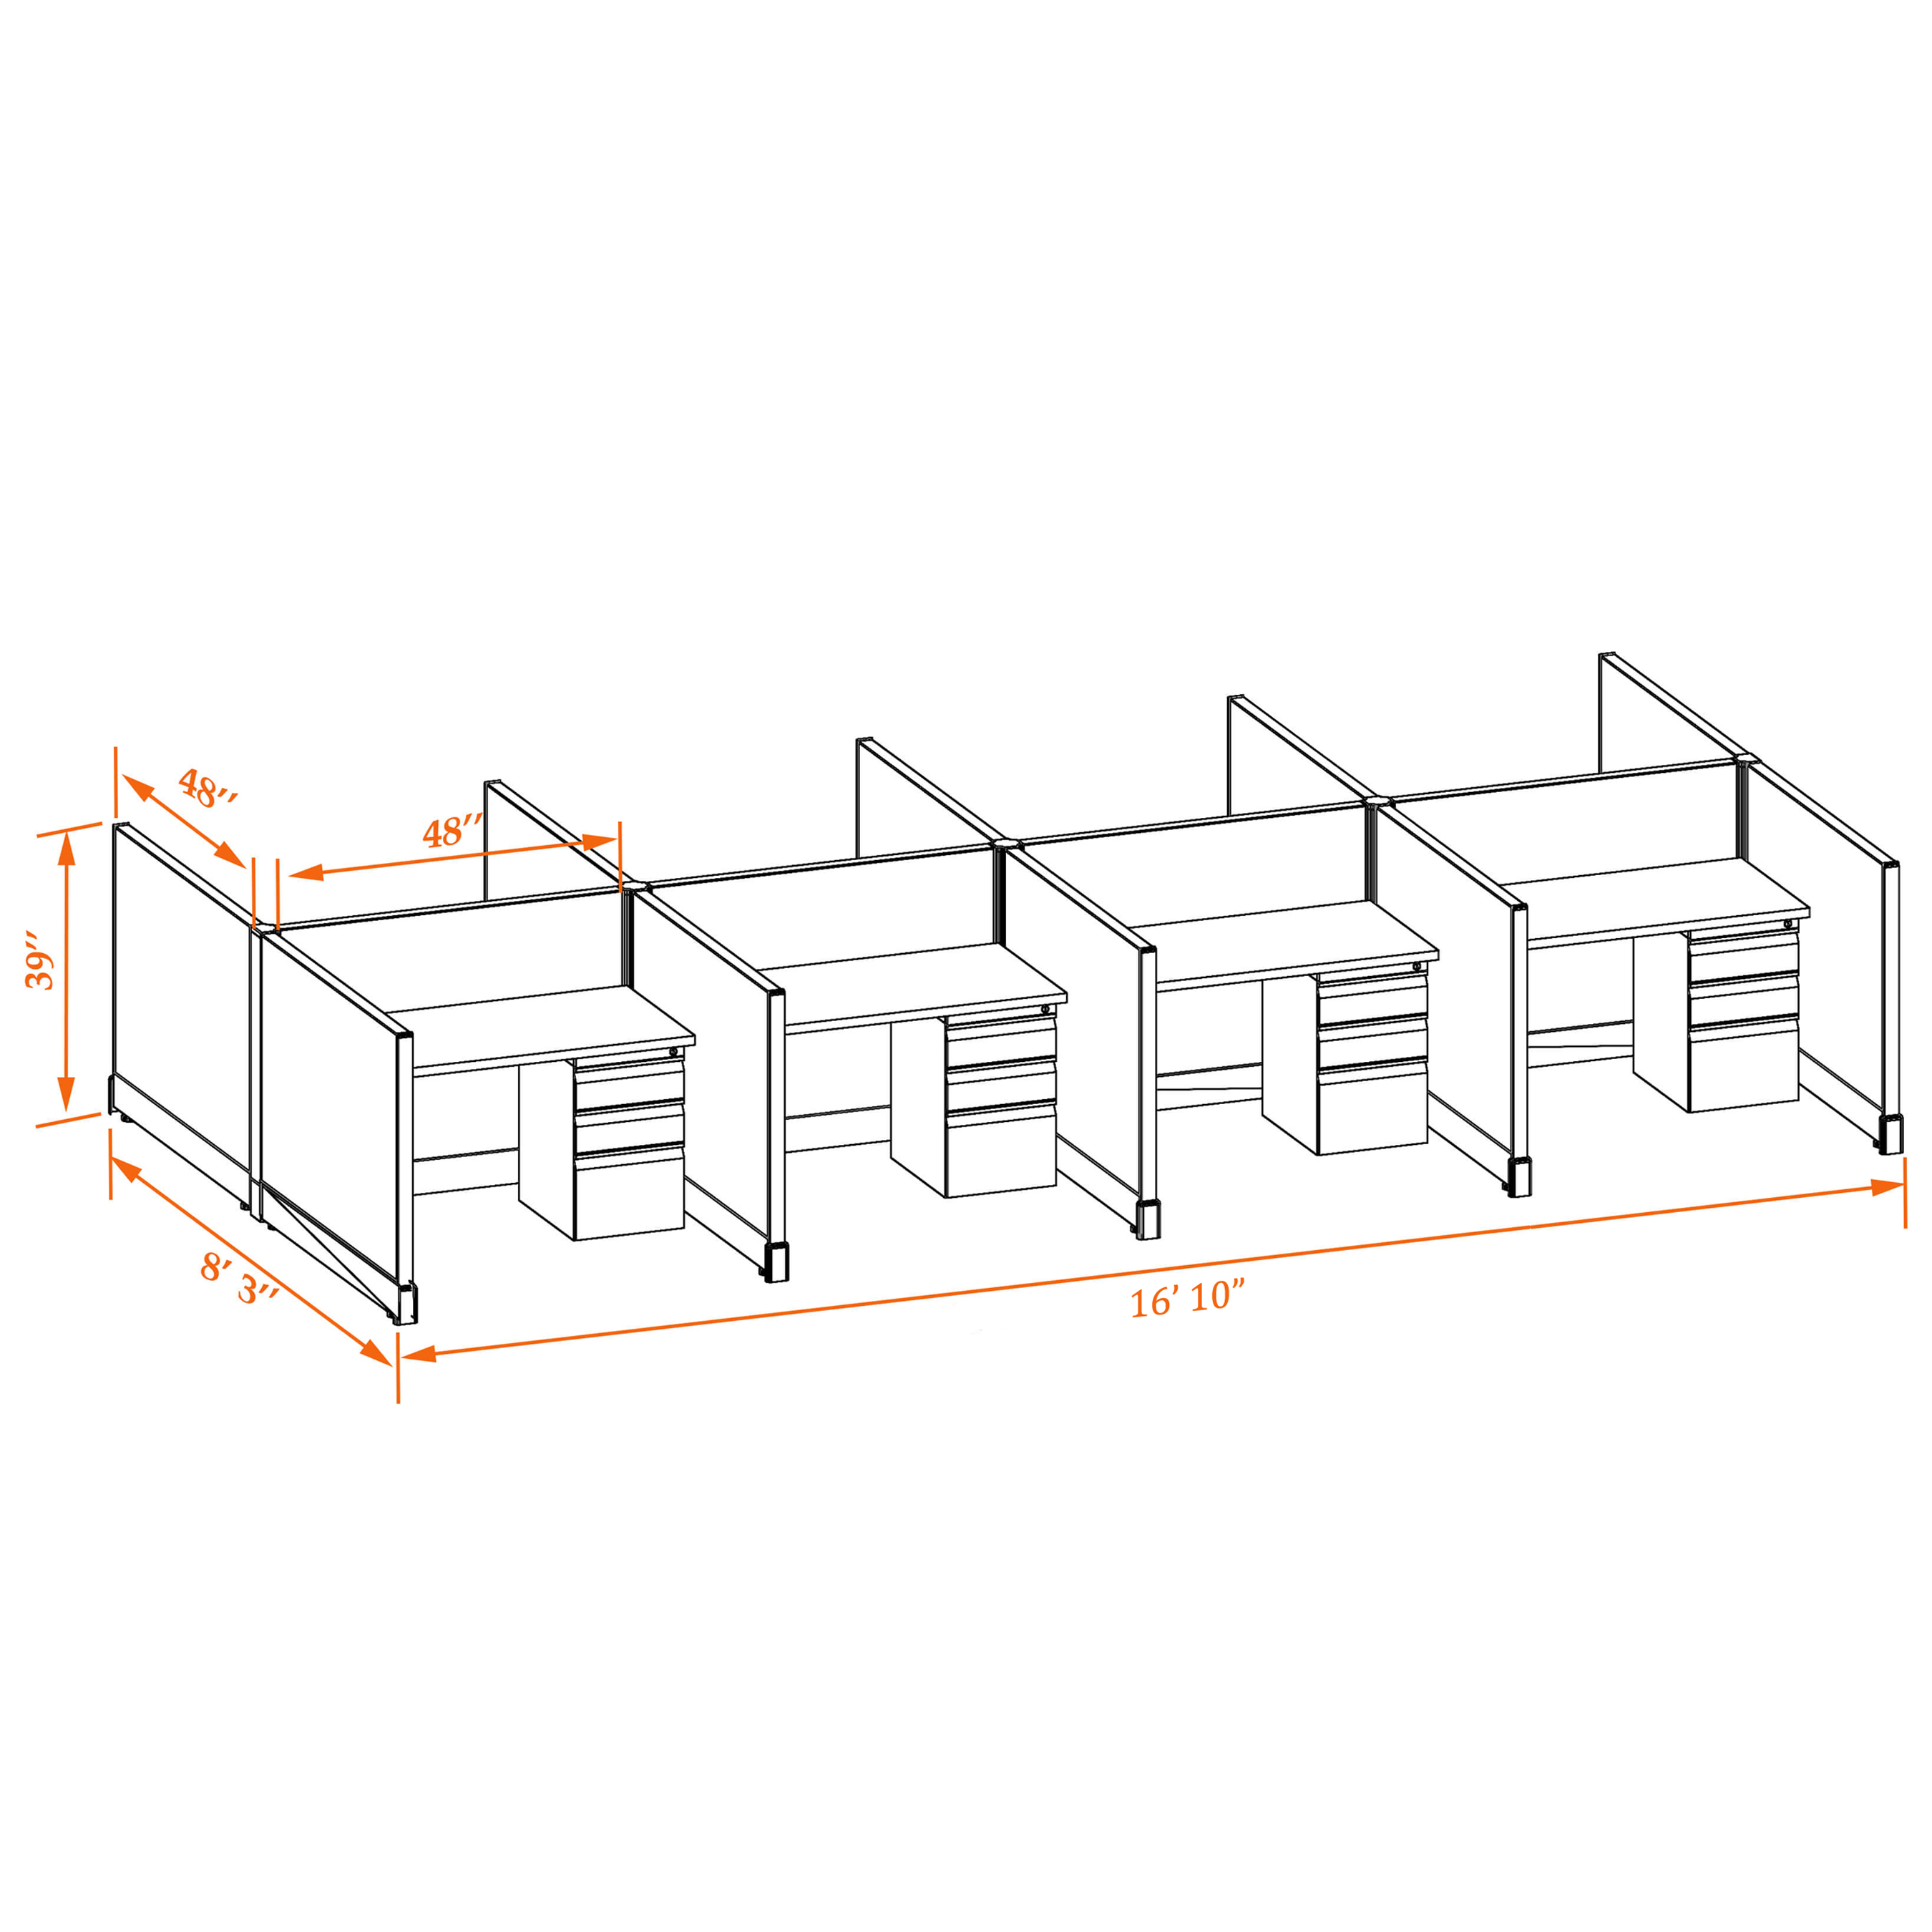 Small office cubicles 39HU 44 8PC 1 2